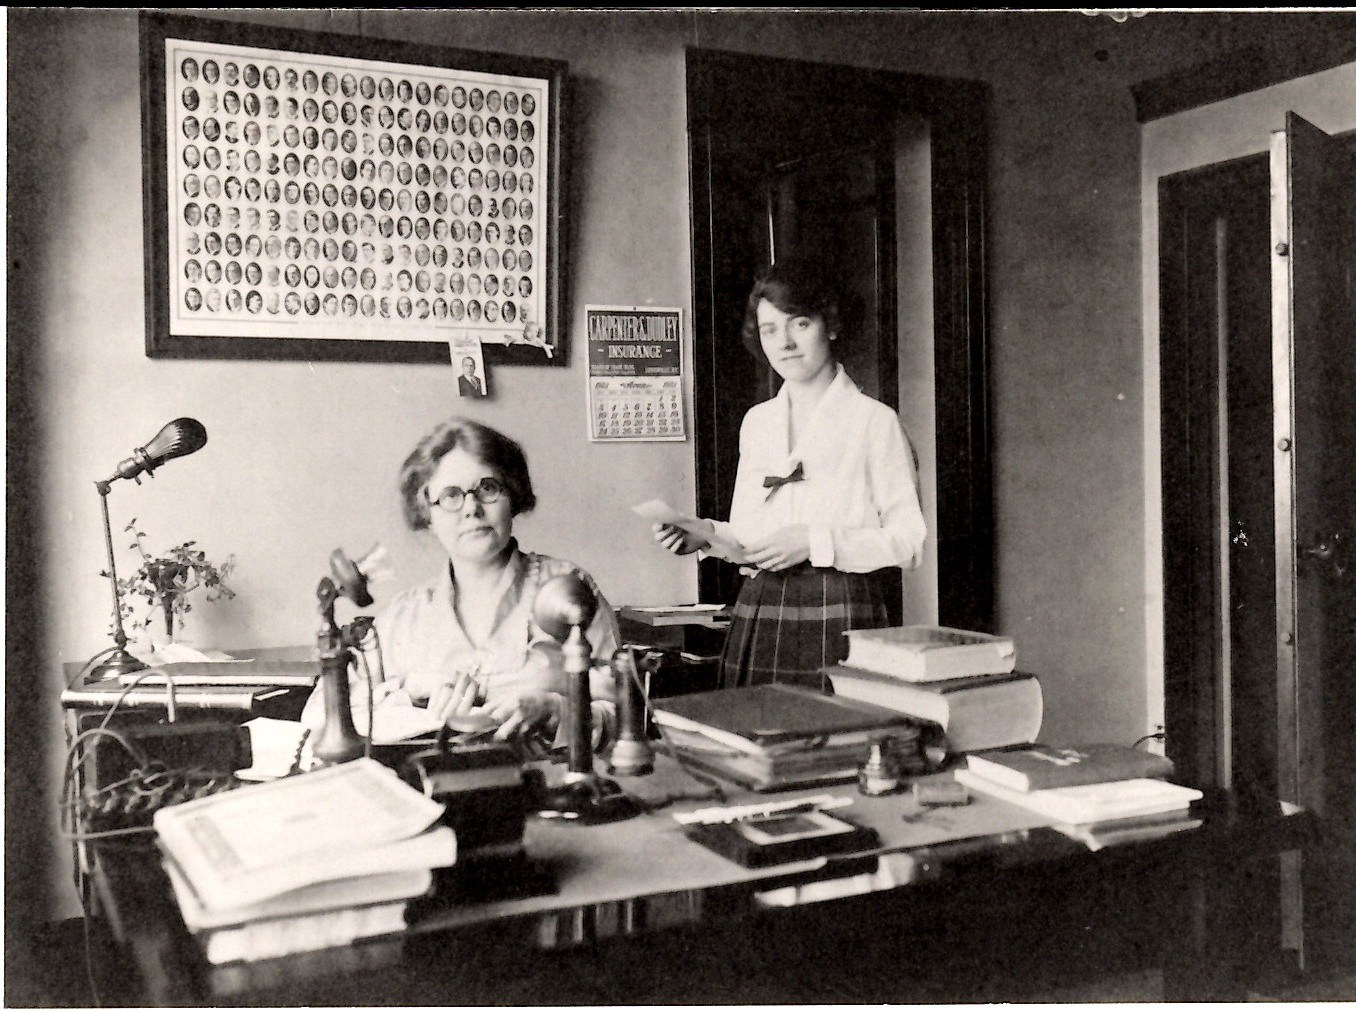 Photo of Mary Howard and woman in an office setting